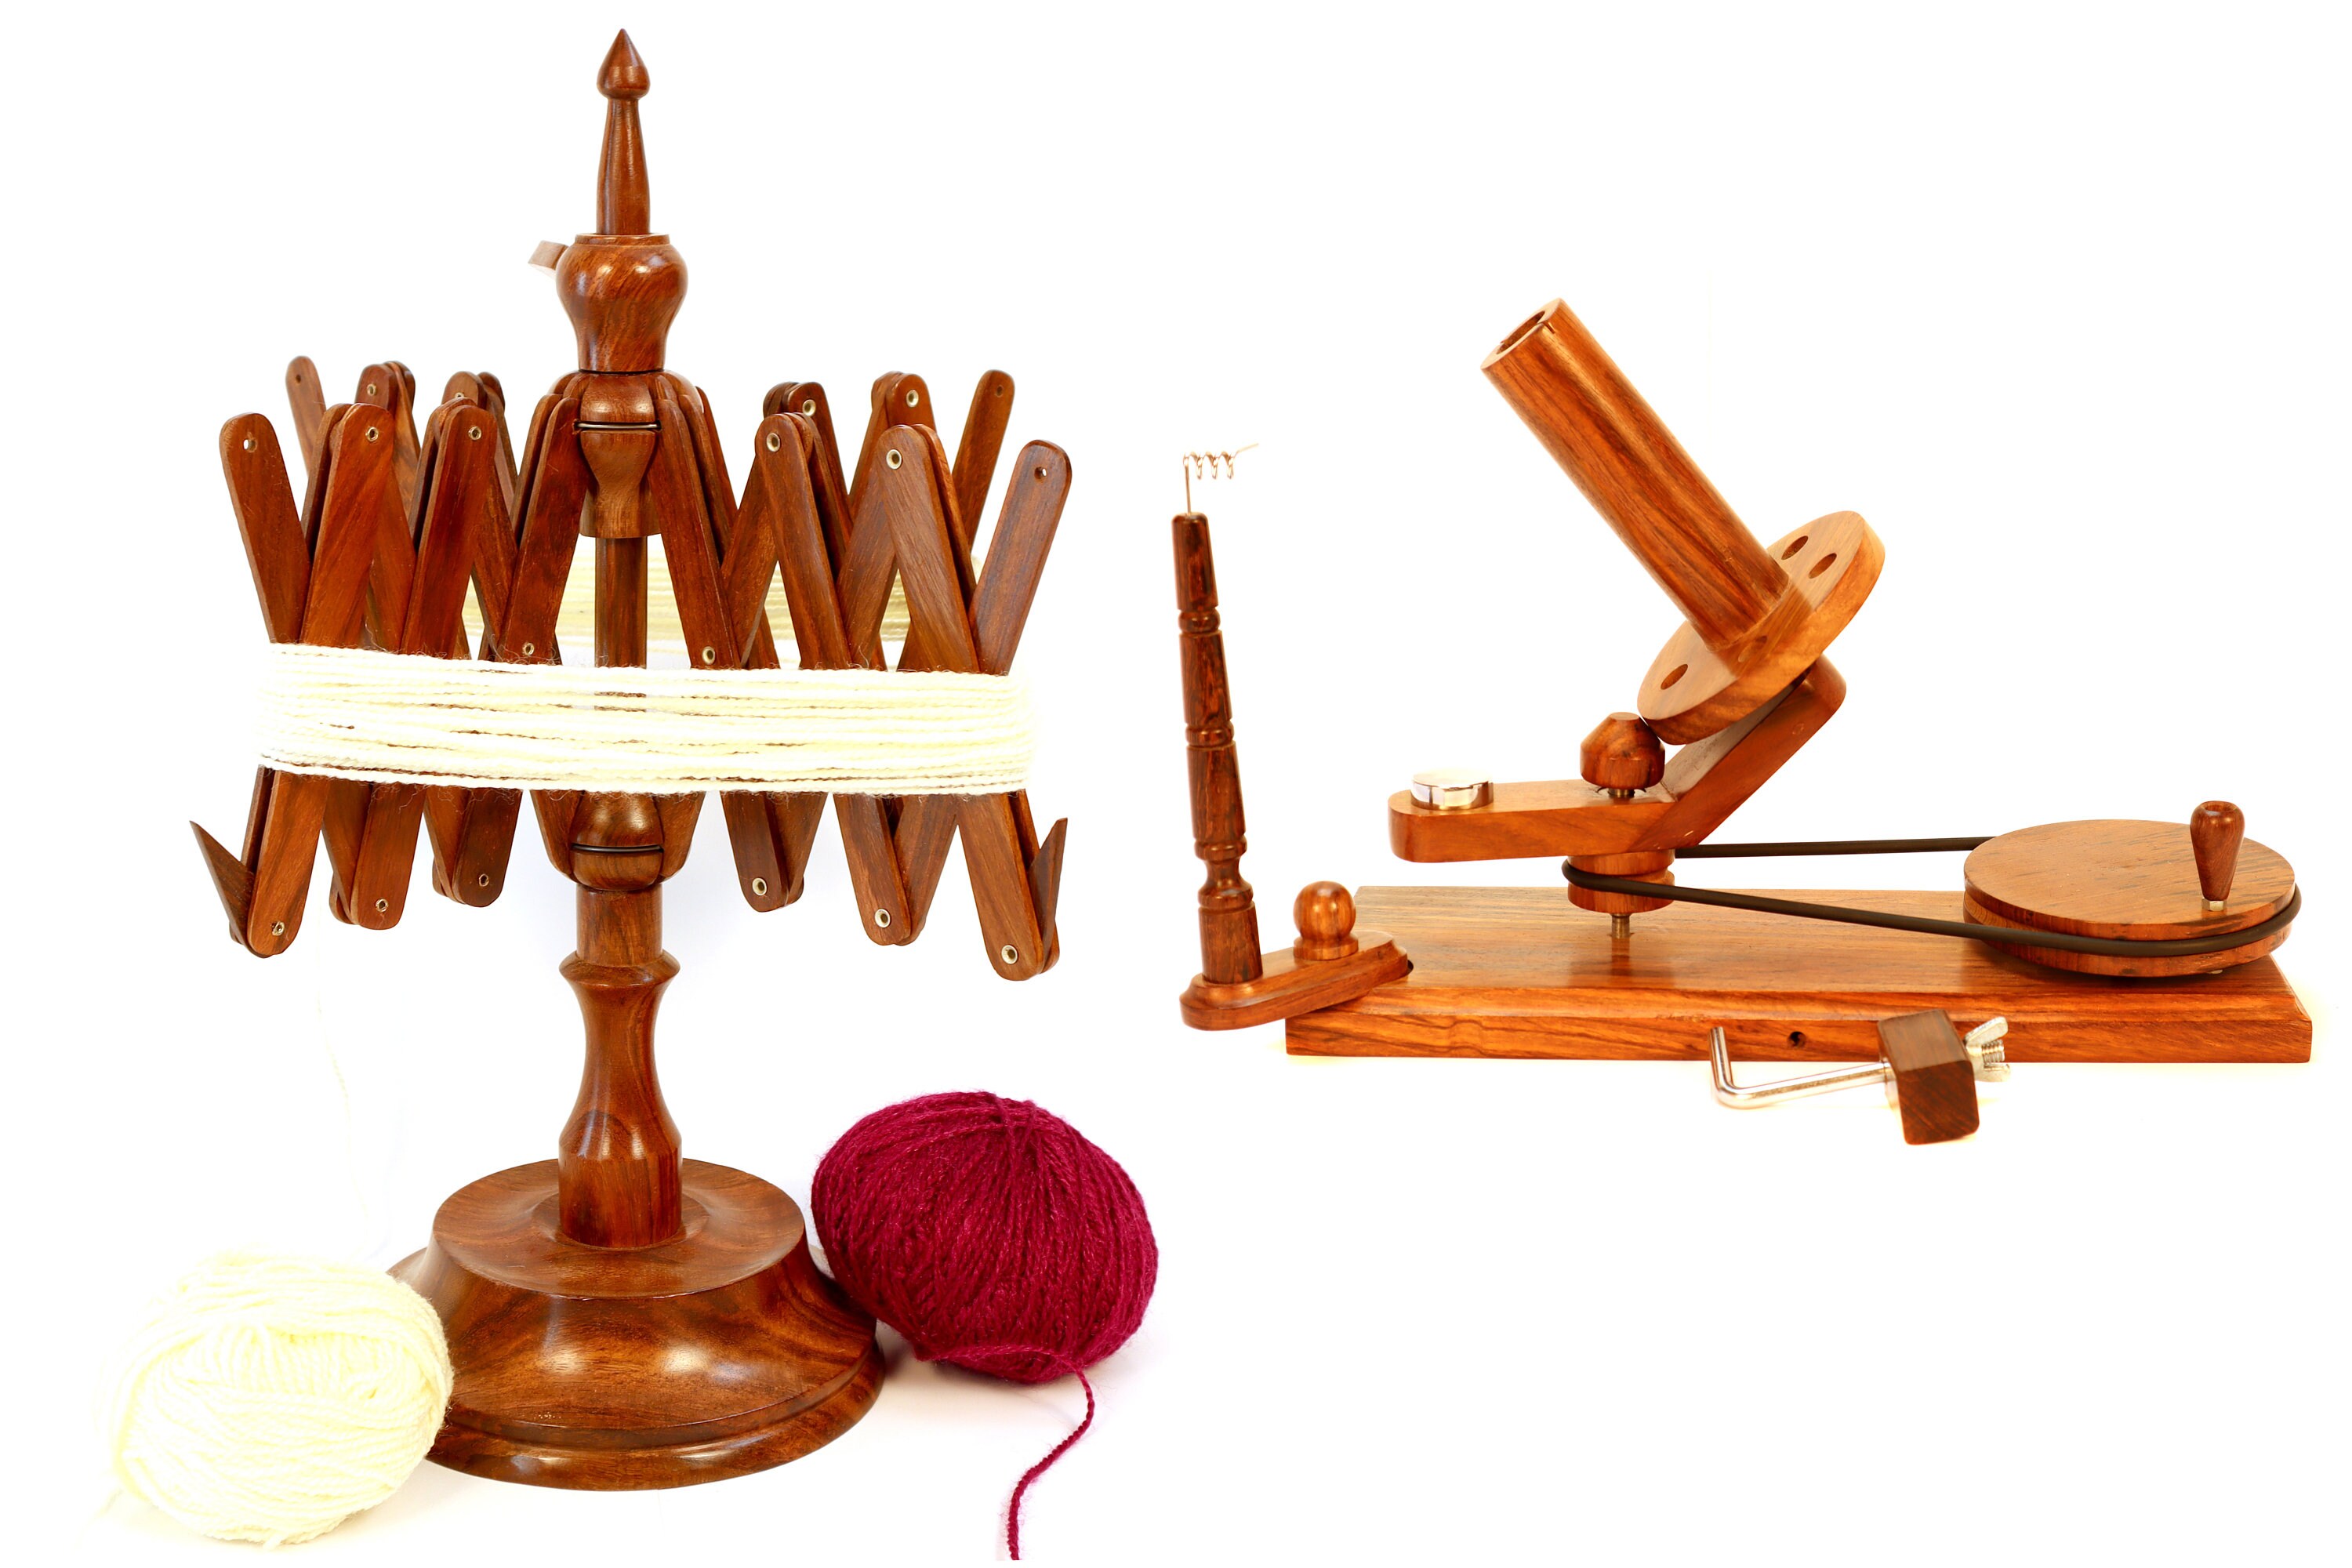 Wooden Yarn Winder for Knitting and Crocheting Handcrafted 